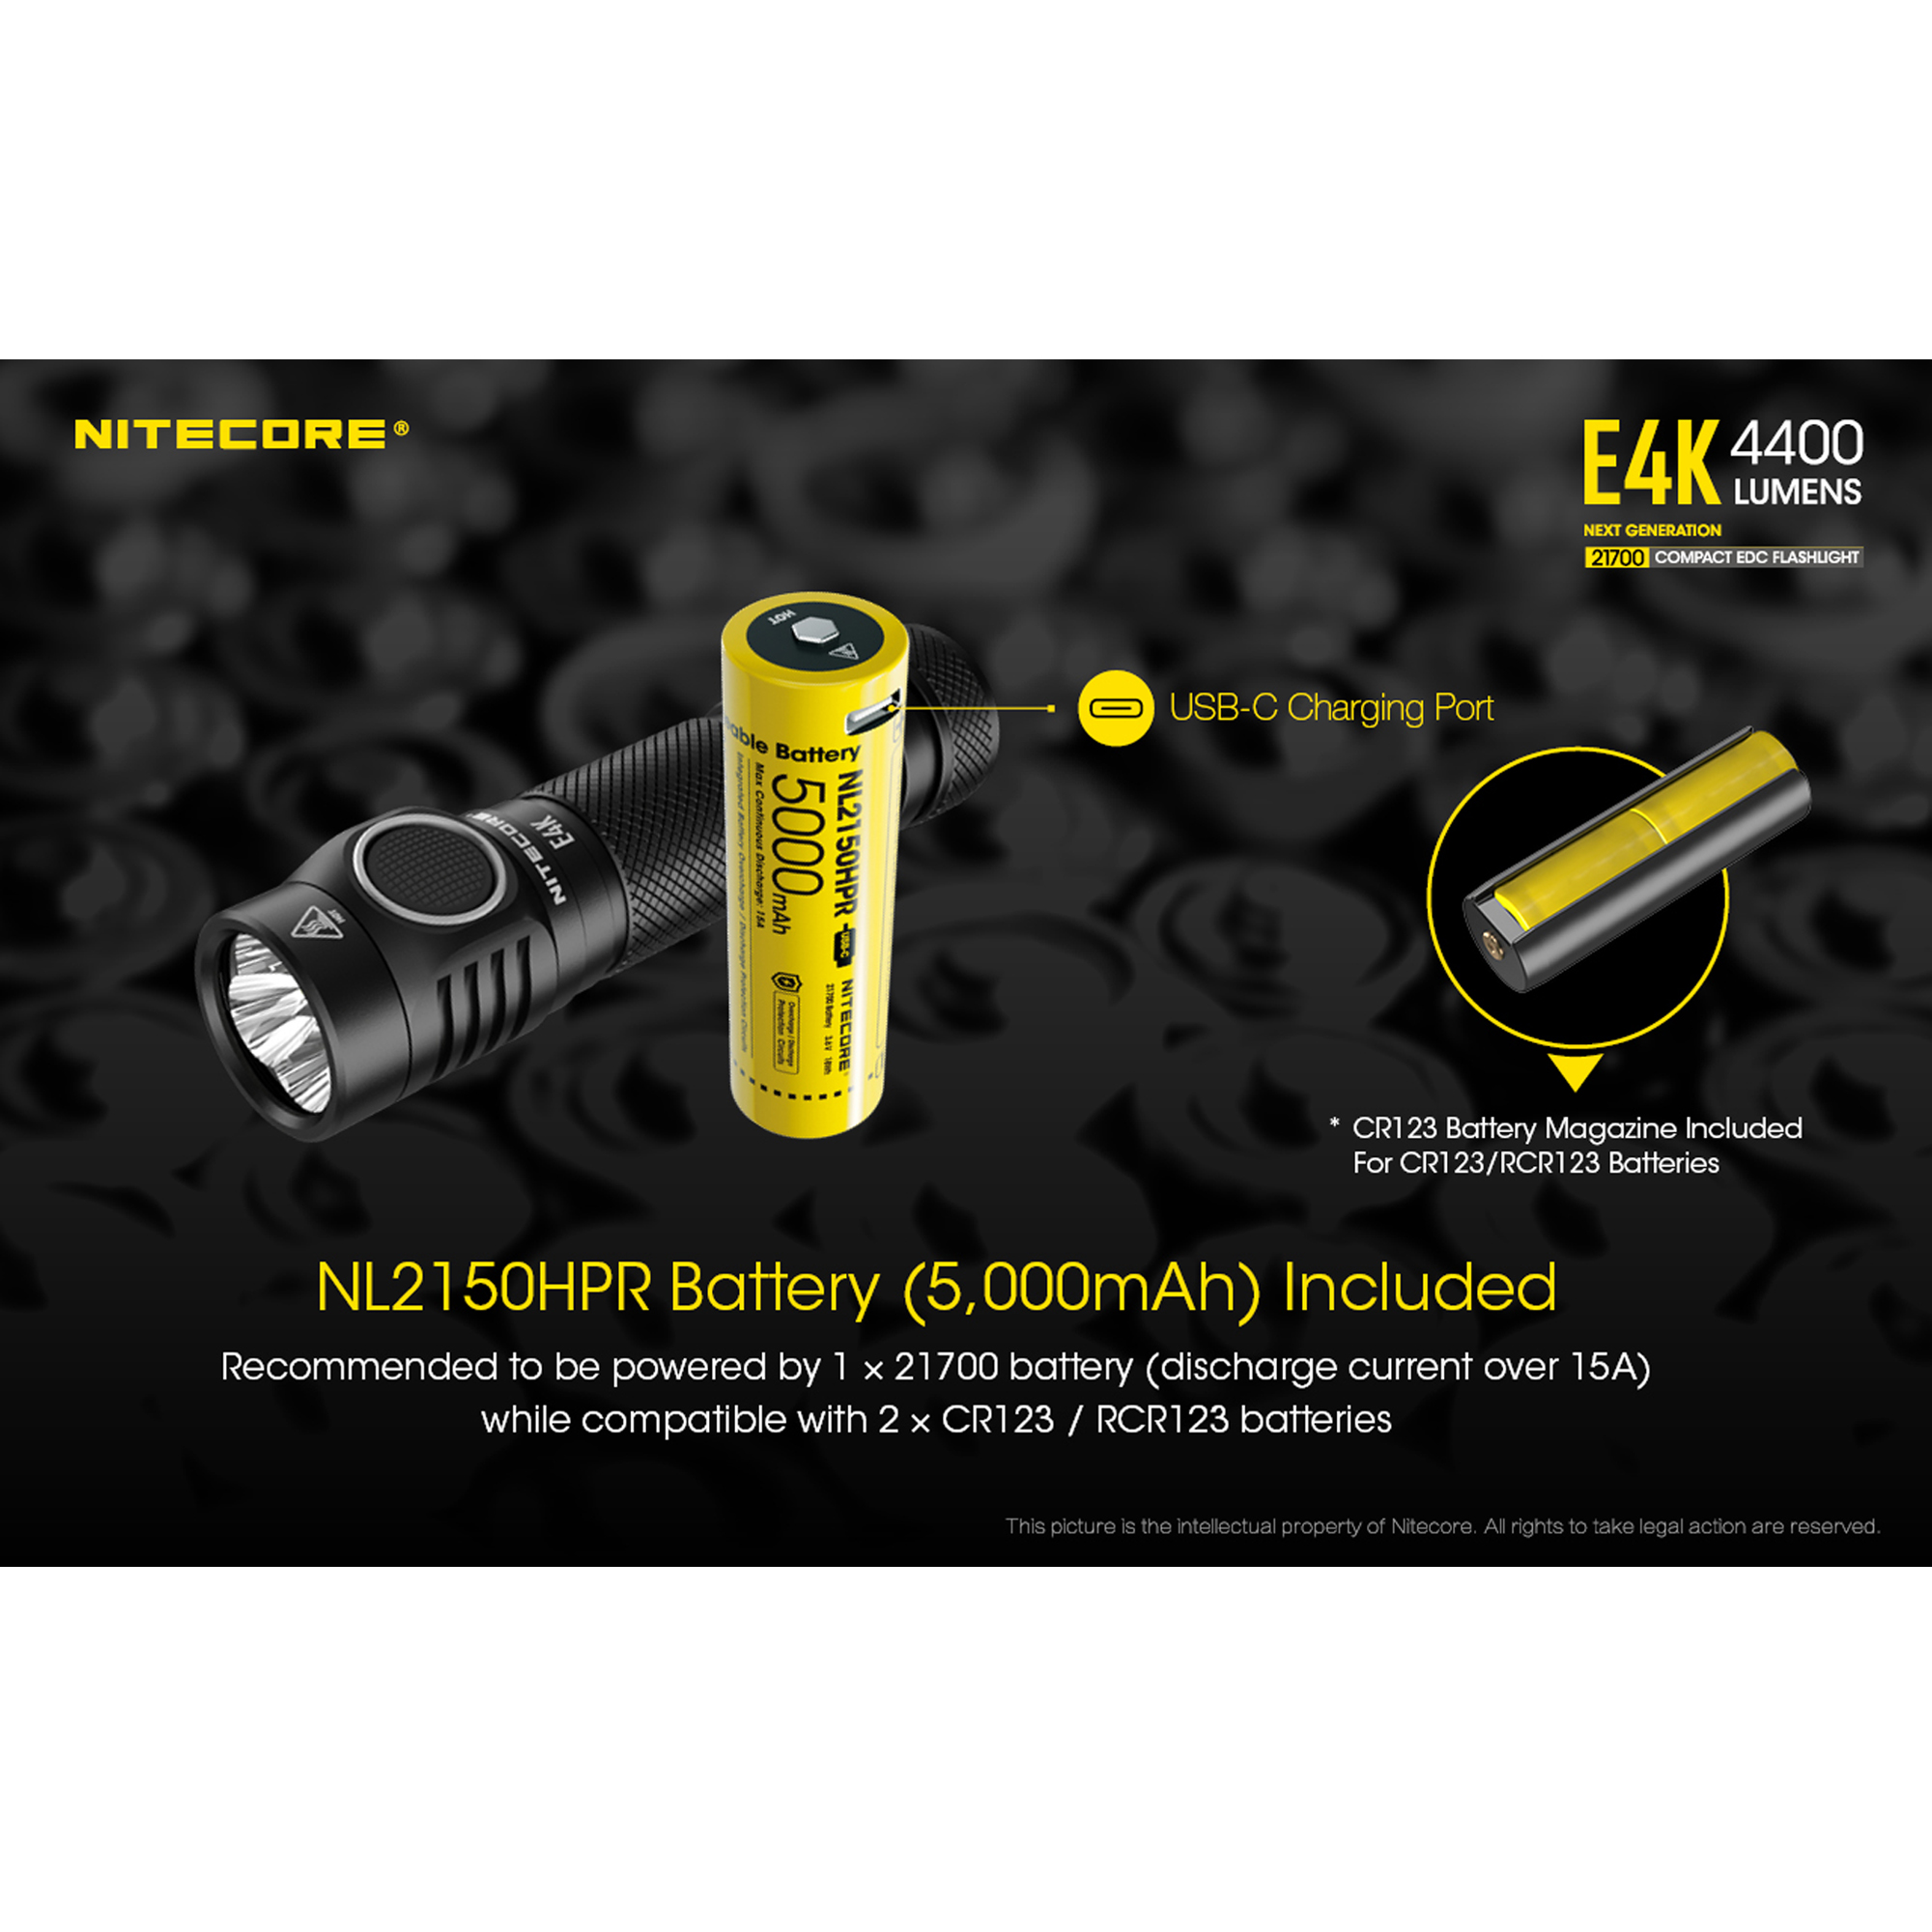 NITECORE E4K 4400 Lumen Lightweight Everyday Carry Flashlight with 5000mAh  USB-C Rechargeable Battery with LumenTac Battery Case